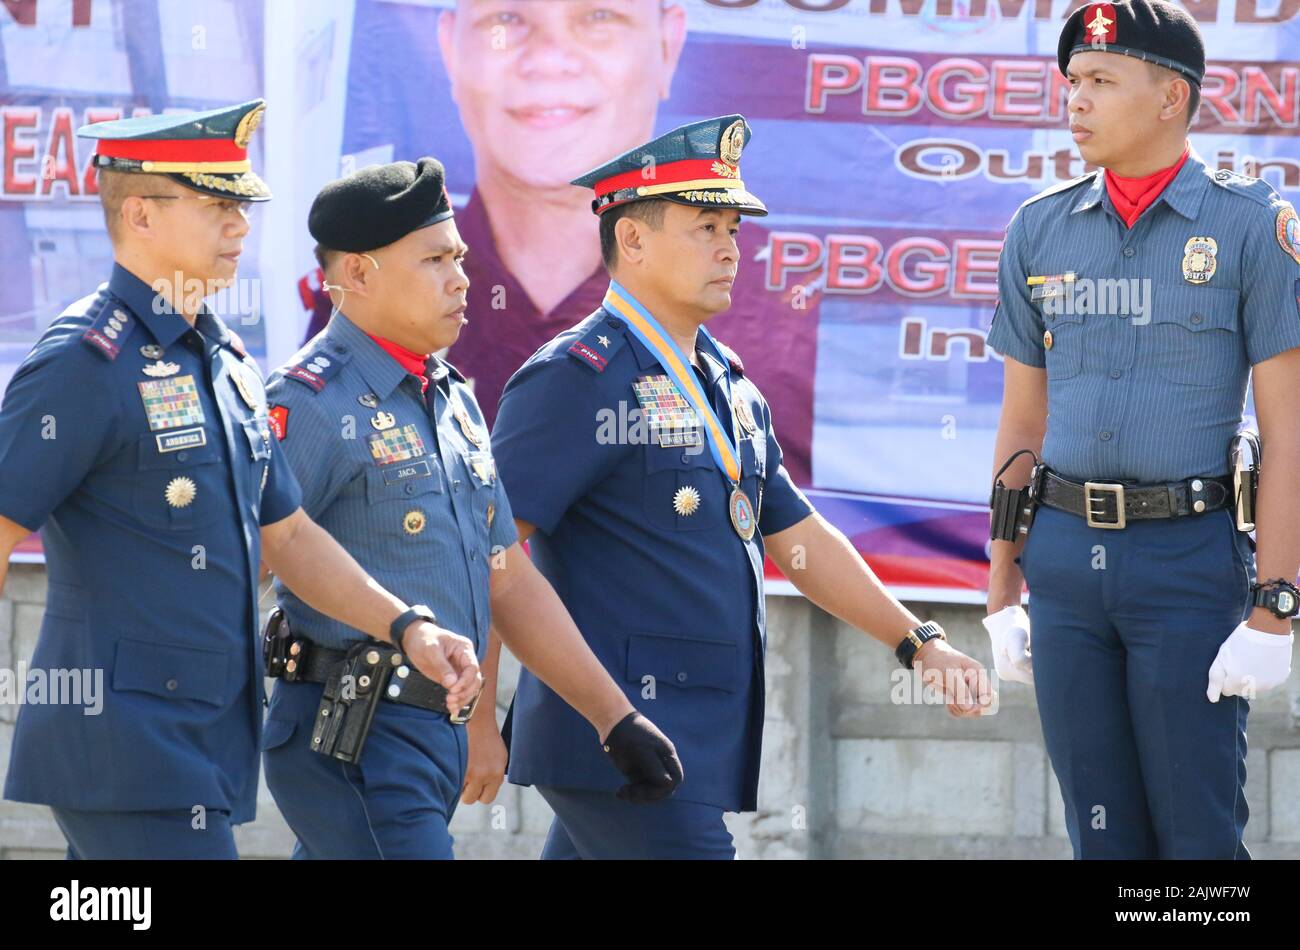 Pasay City, Philippines. 05th Jan, 2020. (L) PCOL COSME A ABRENICAChief of Staff AVSEGROUP, (2nd L) PLTCOL JACA troop commander, (C) Director of AVSEGROUP, POLICE BRIGADIER GENERAL CRIZALDO O NIEVES during turn over of command of outgoing PNP (Philippine National Police) - AVSEGROUP (Aviation Security Group) Director PBGEN ARNEL ESCOBAL at PNP-AVSEGROUP Head Quarters, NAIA Complex. (*Photo by Herman R. Lumanog/Pacific Press) Credit: Pacific Press Agency/Alamy Live News Stock Photo